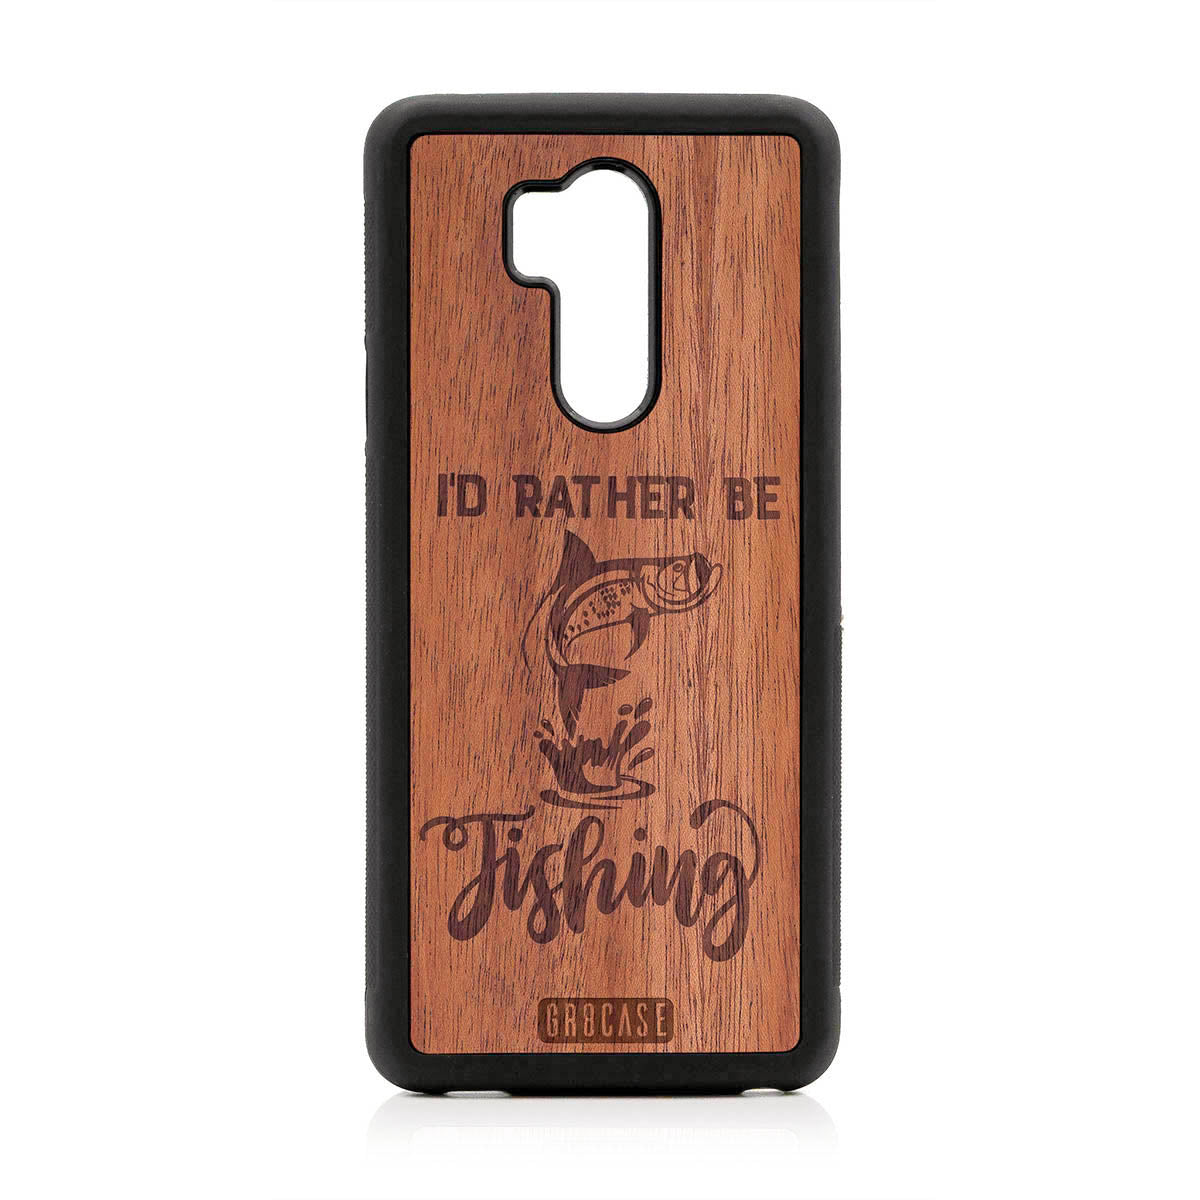 I'D Rather Be Fishing Design Wood Case For LG G7 ThinQ